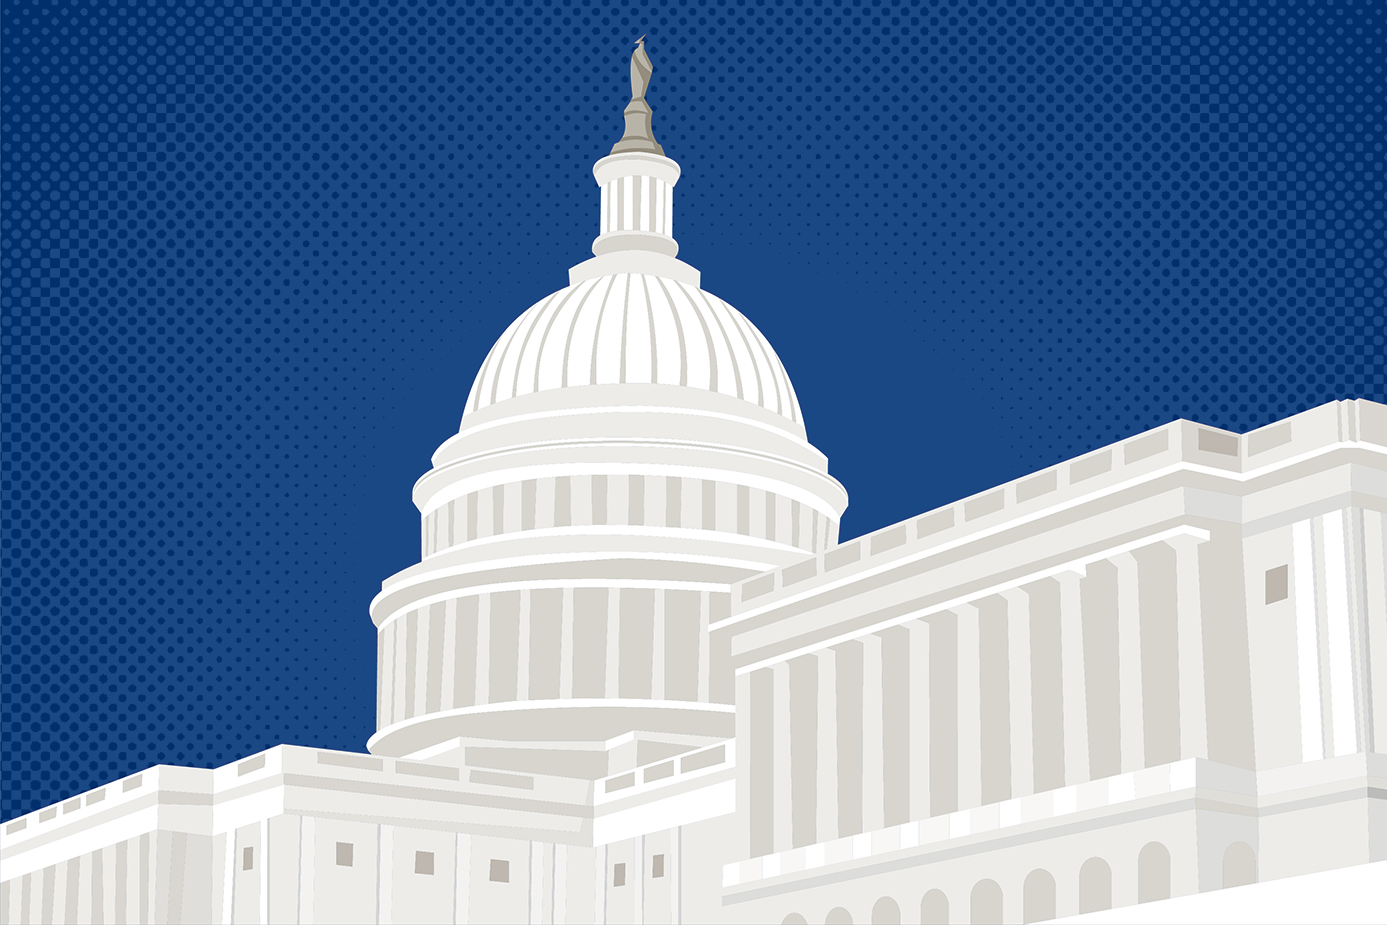 Illustration of the US Capitol buiding